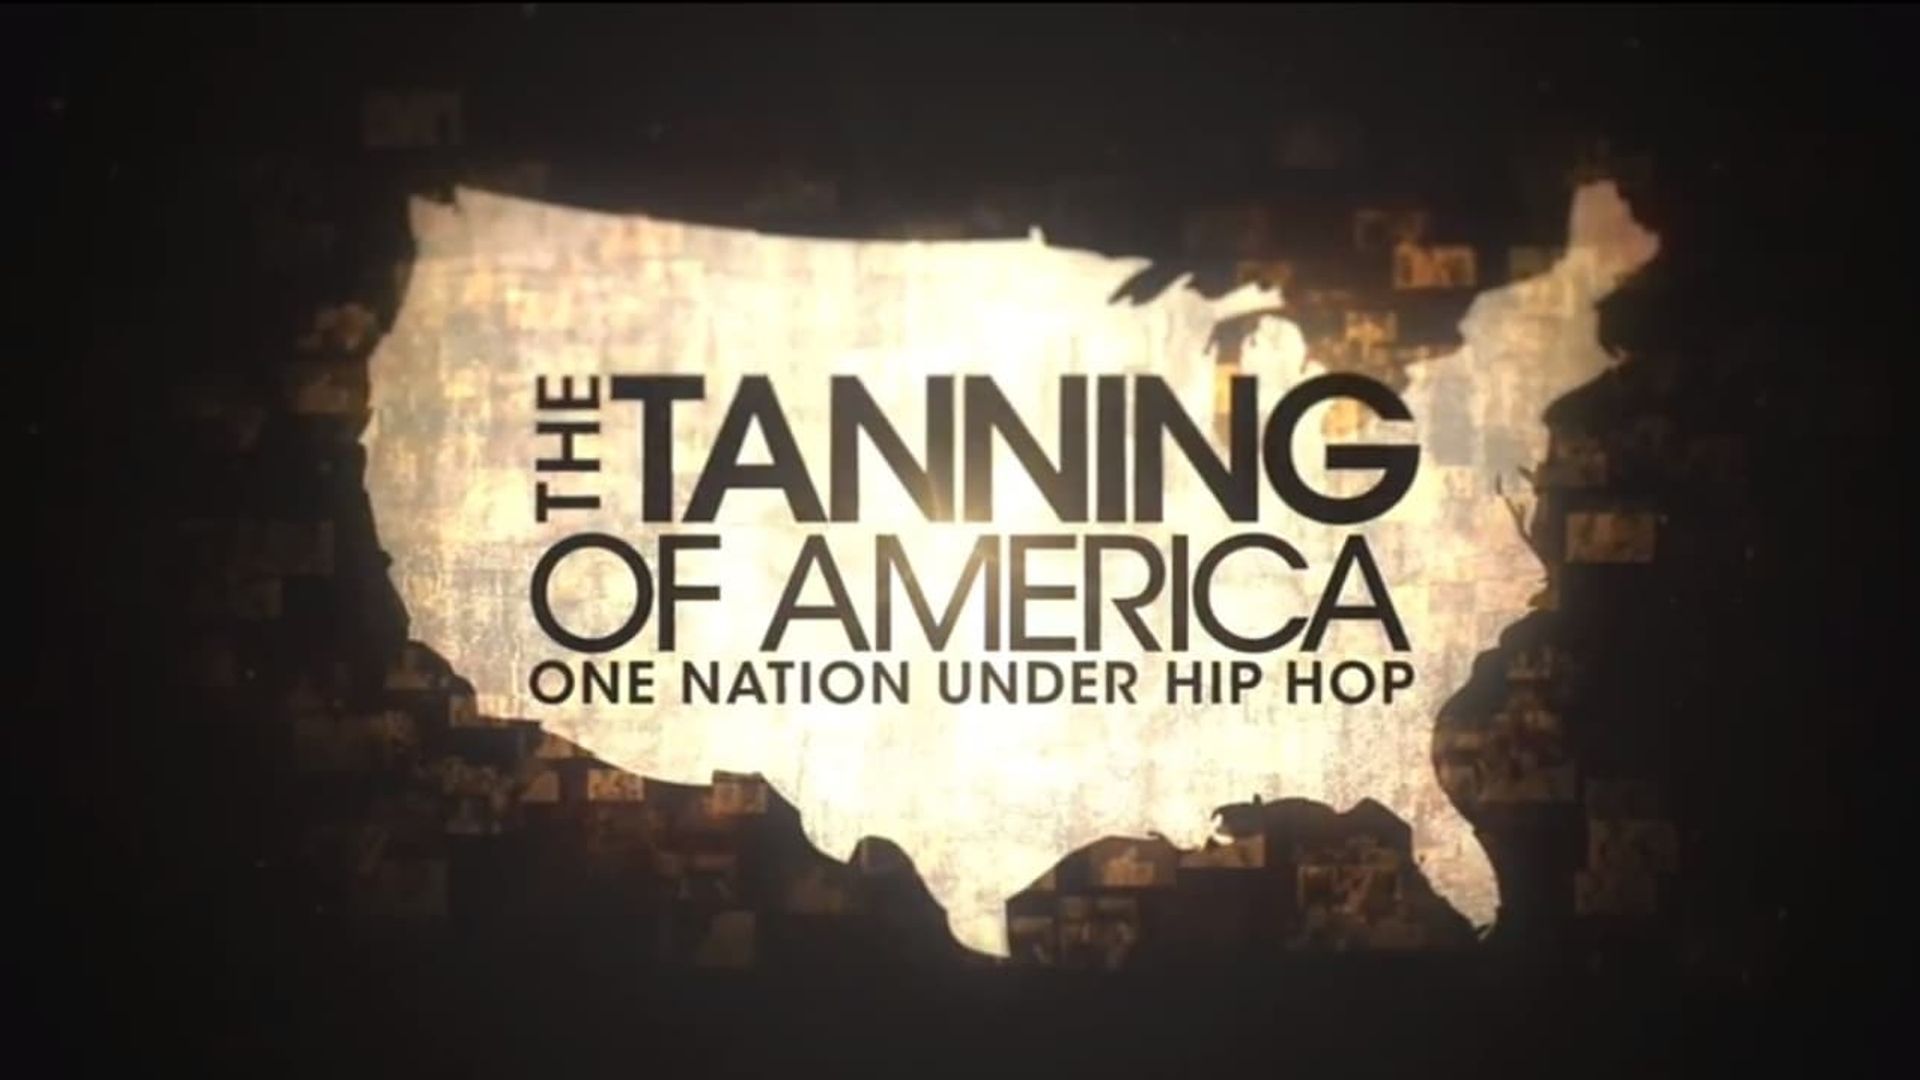 The Tanning of America background